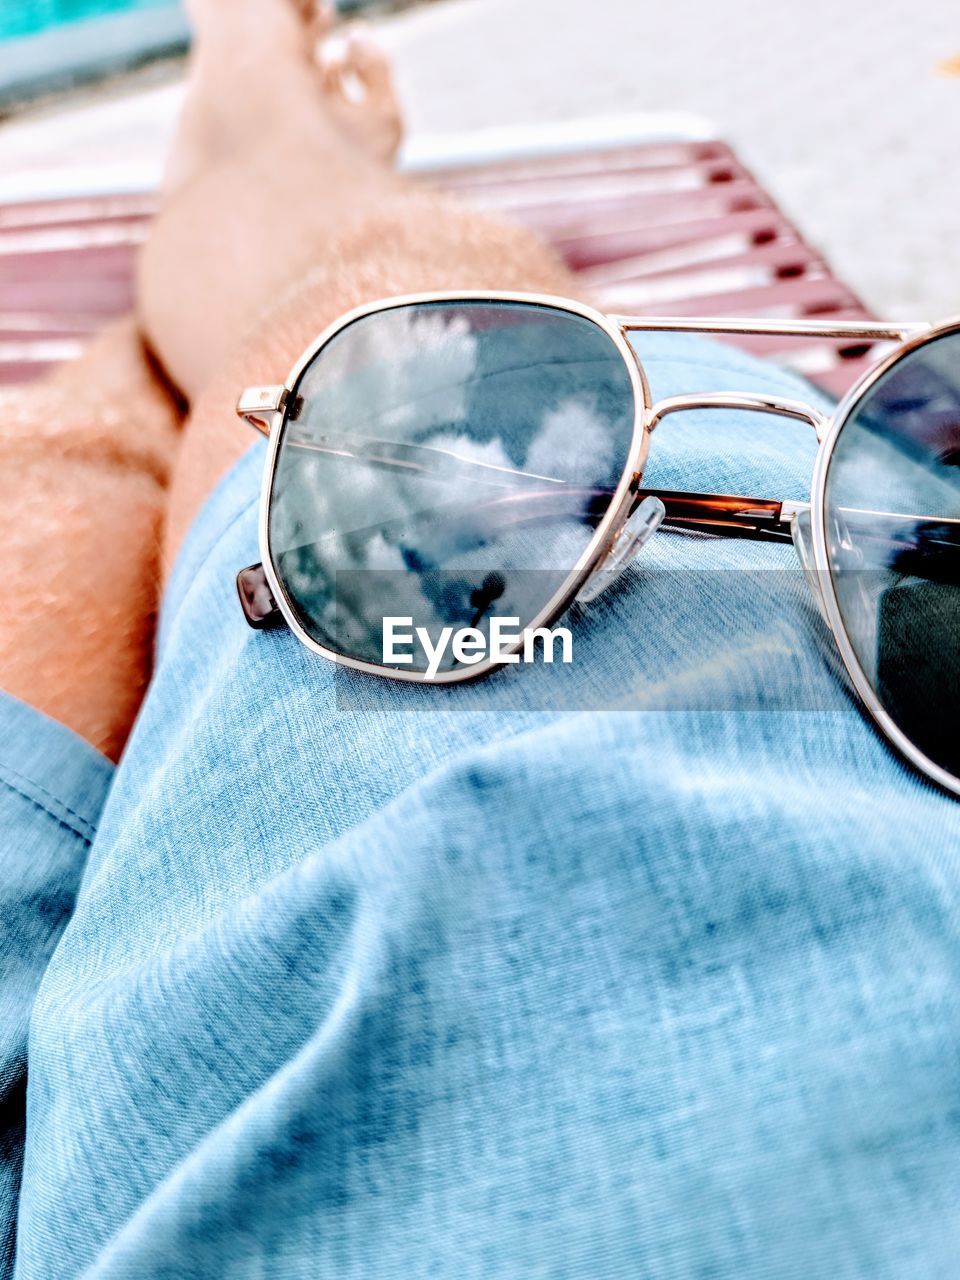 CLOSE-UP OF SUNGLASSES WITH REFLECTION OF MAN